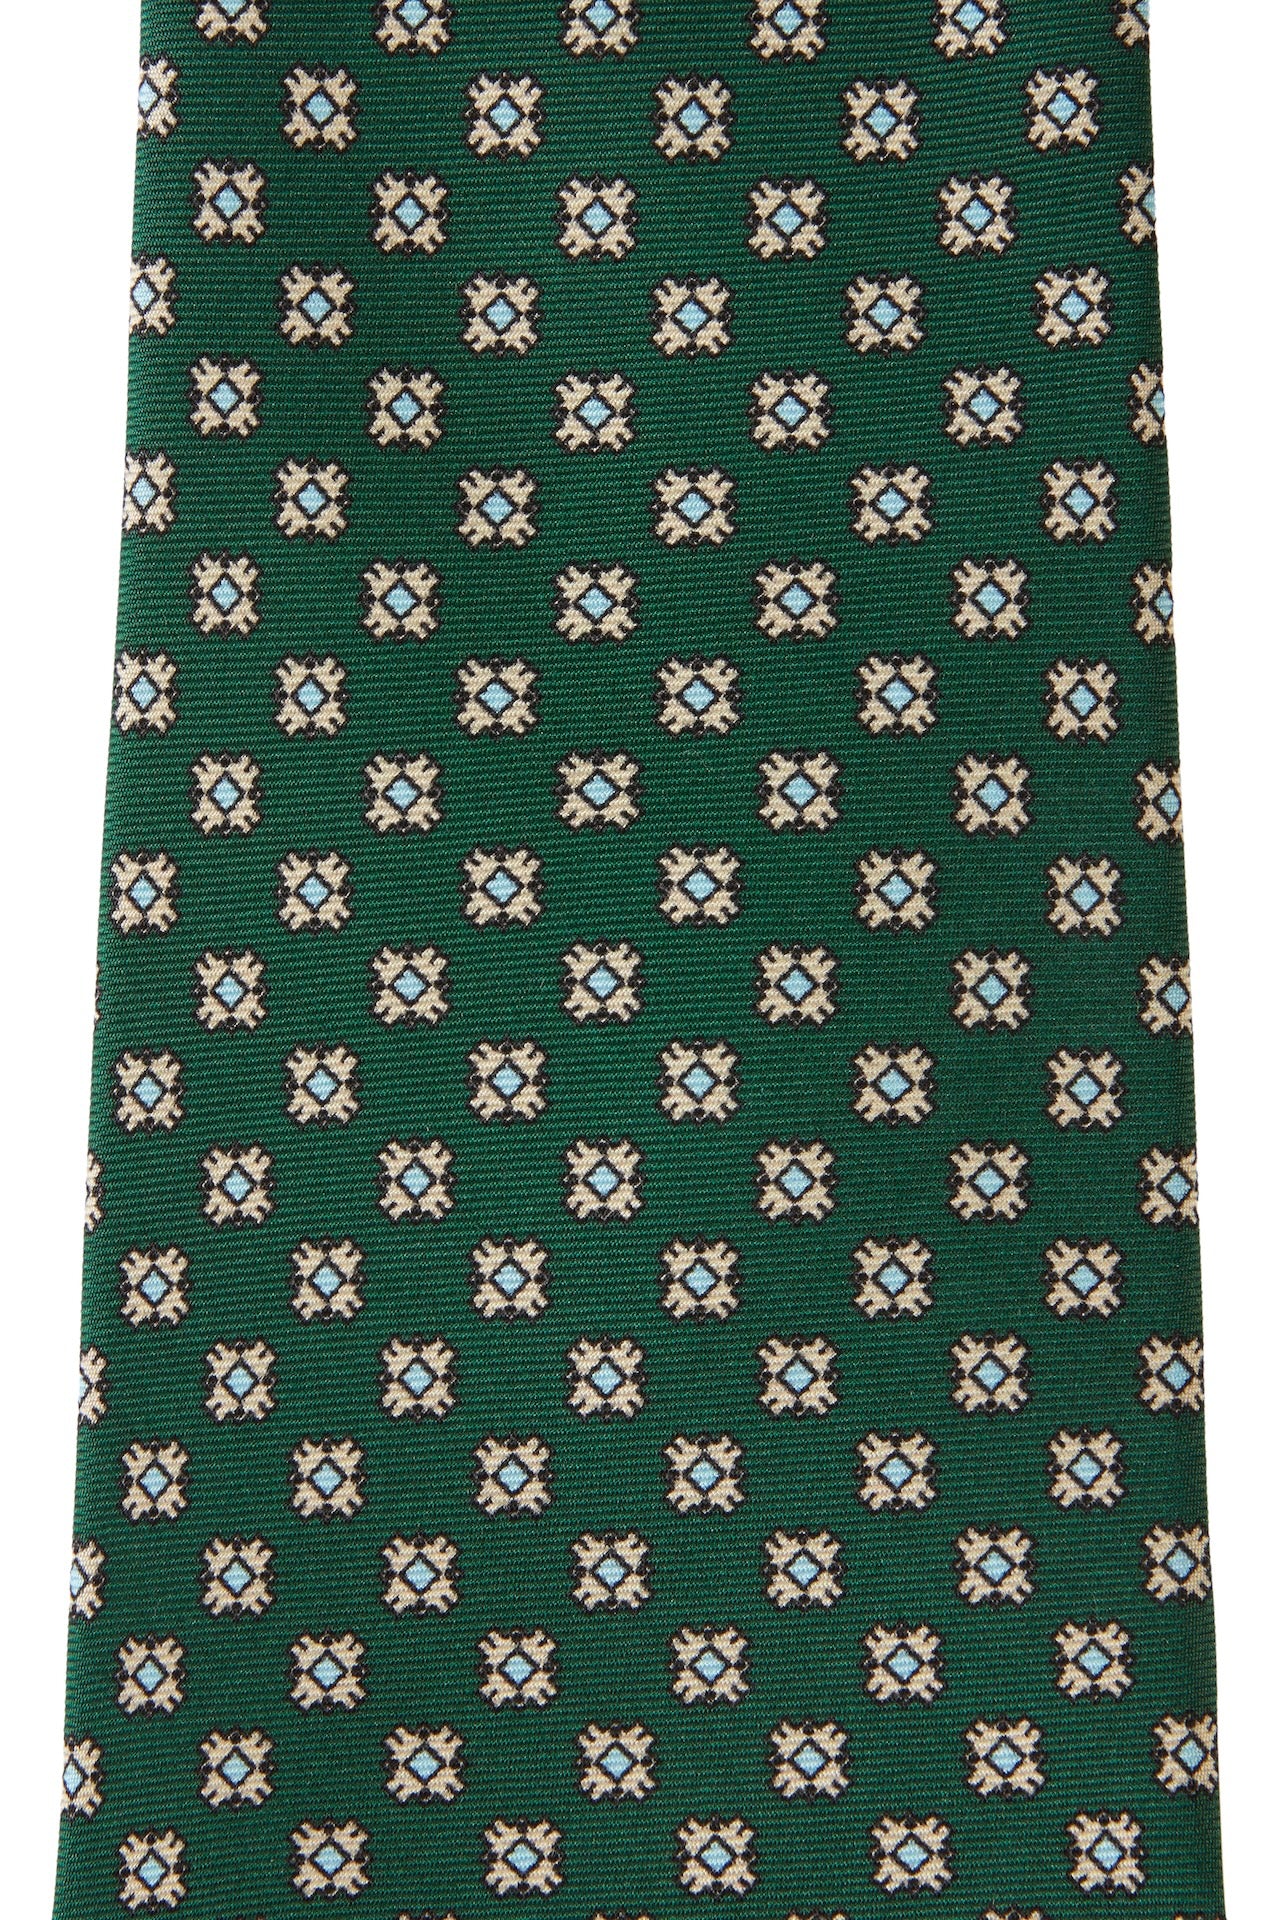 Green Square pattern Tie